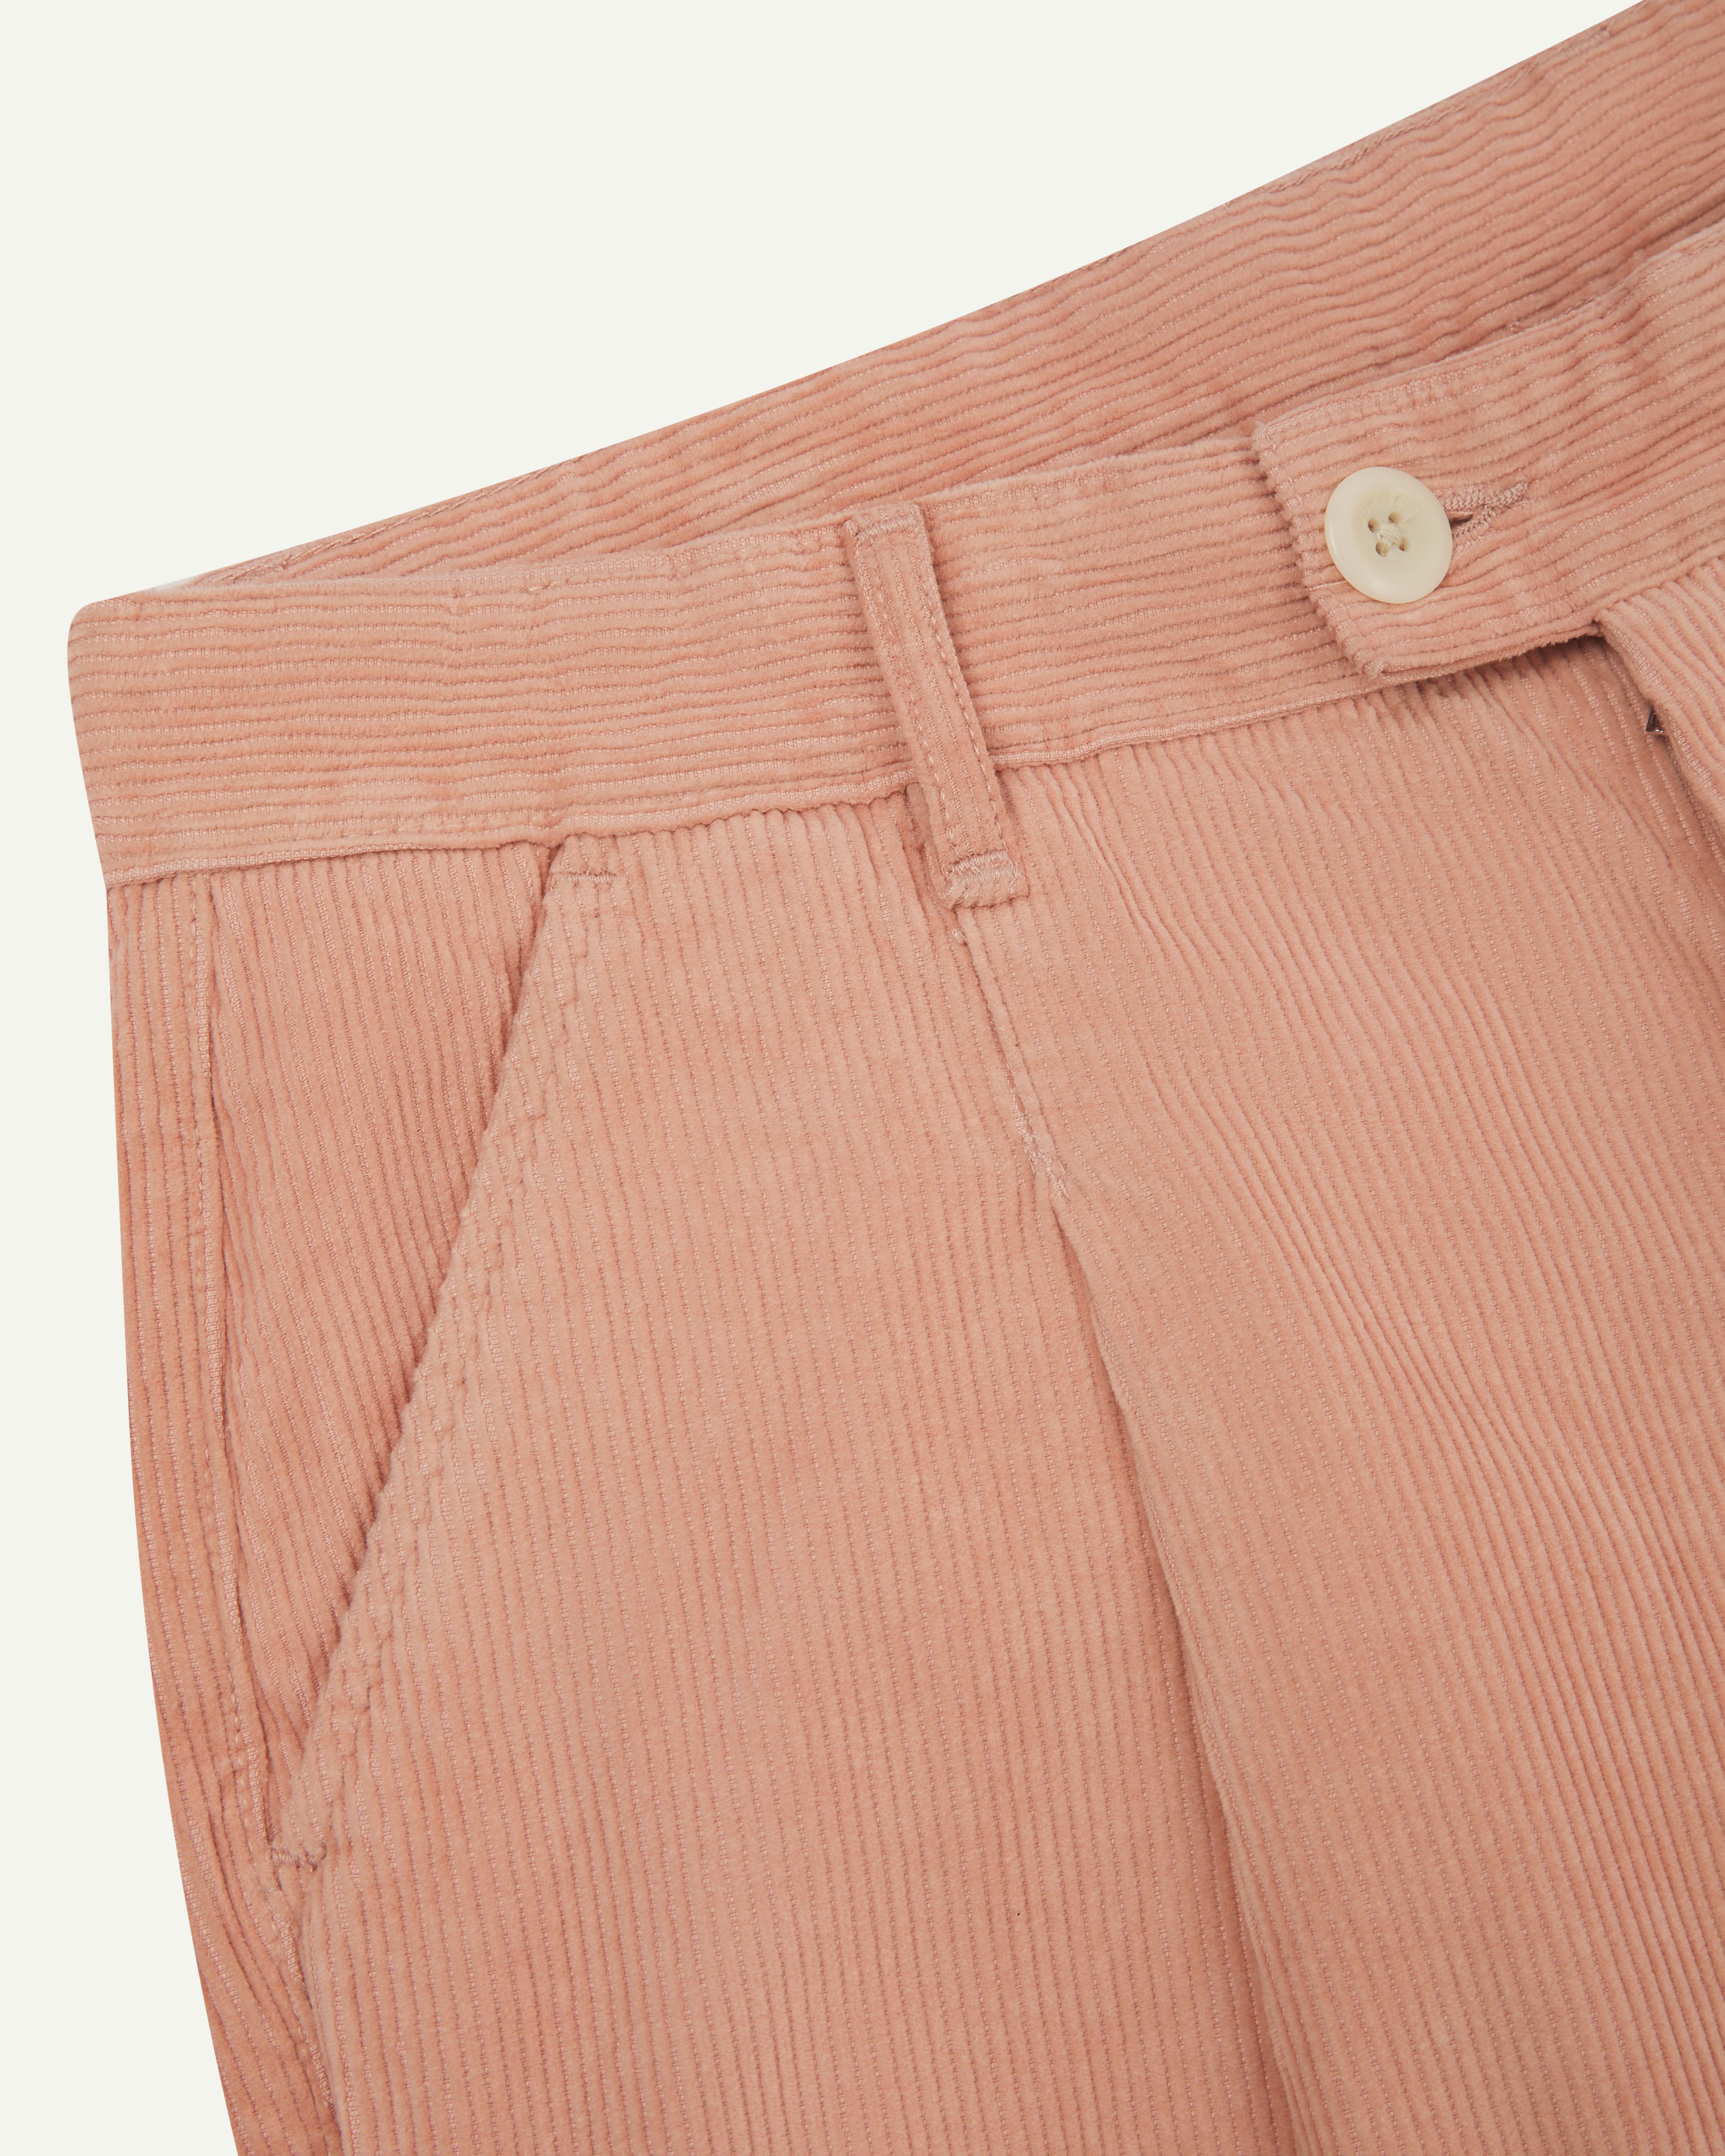 Front close-up shot of #5018 Uskees men's organic corduroy boat trousers in dusty pink showing belt loops, buttoned fastening and slanted front pocket.